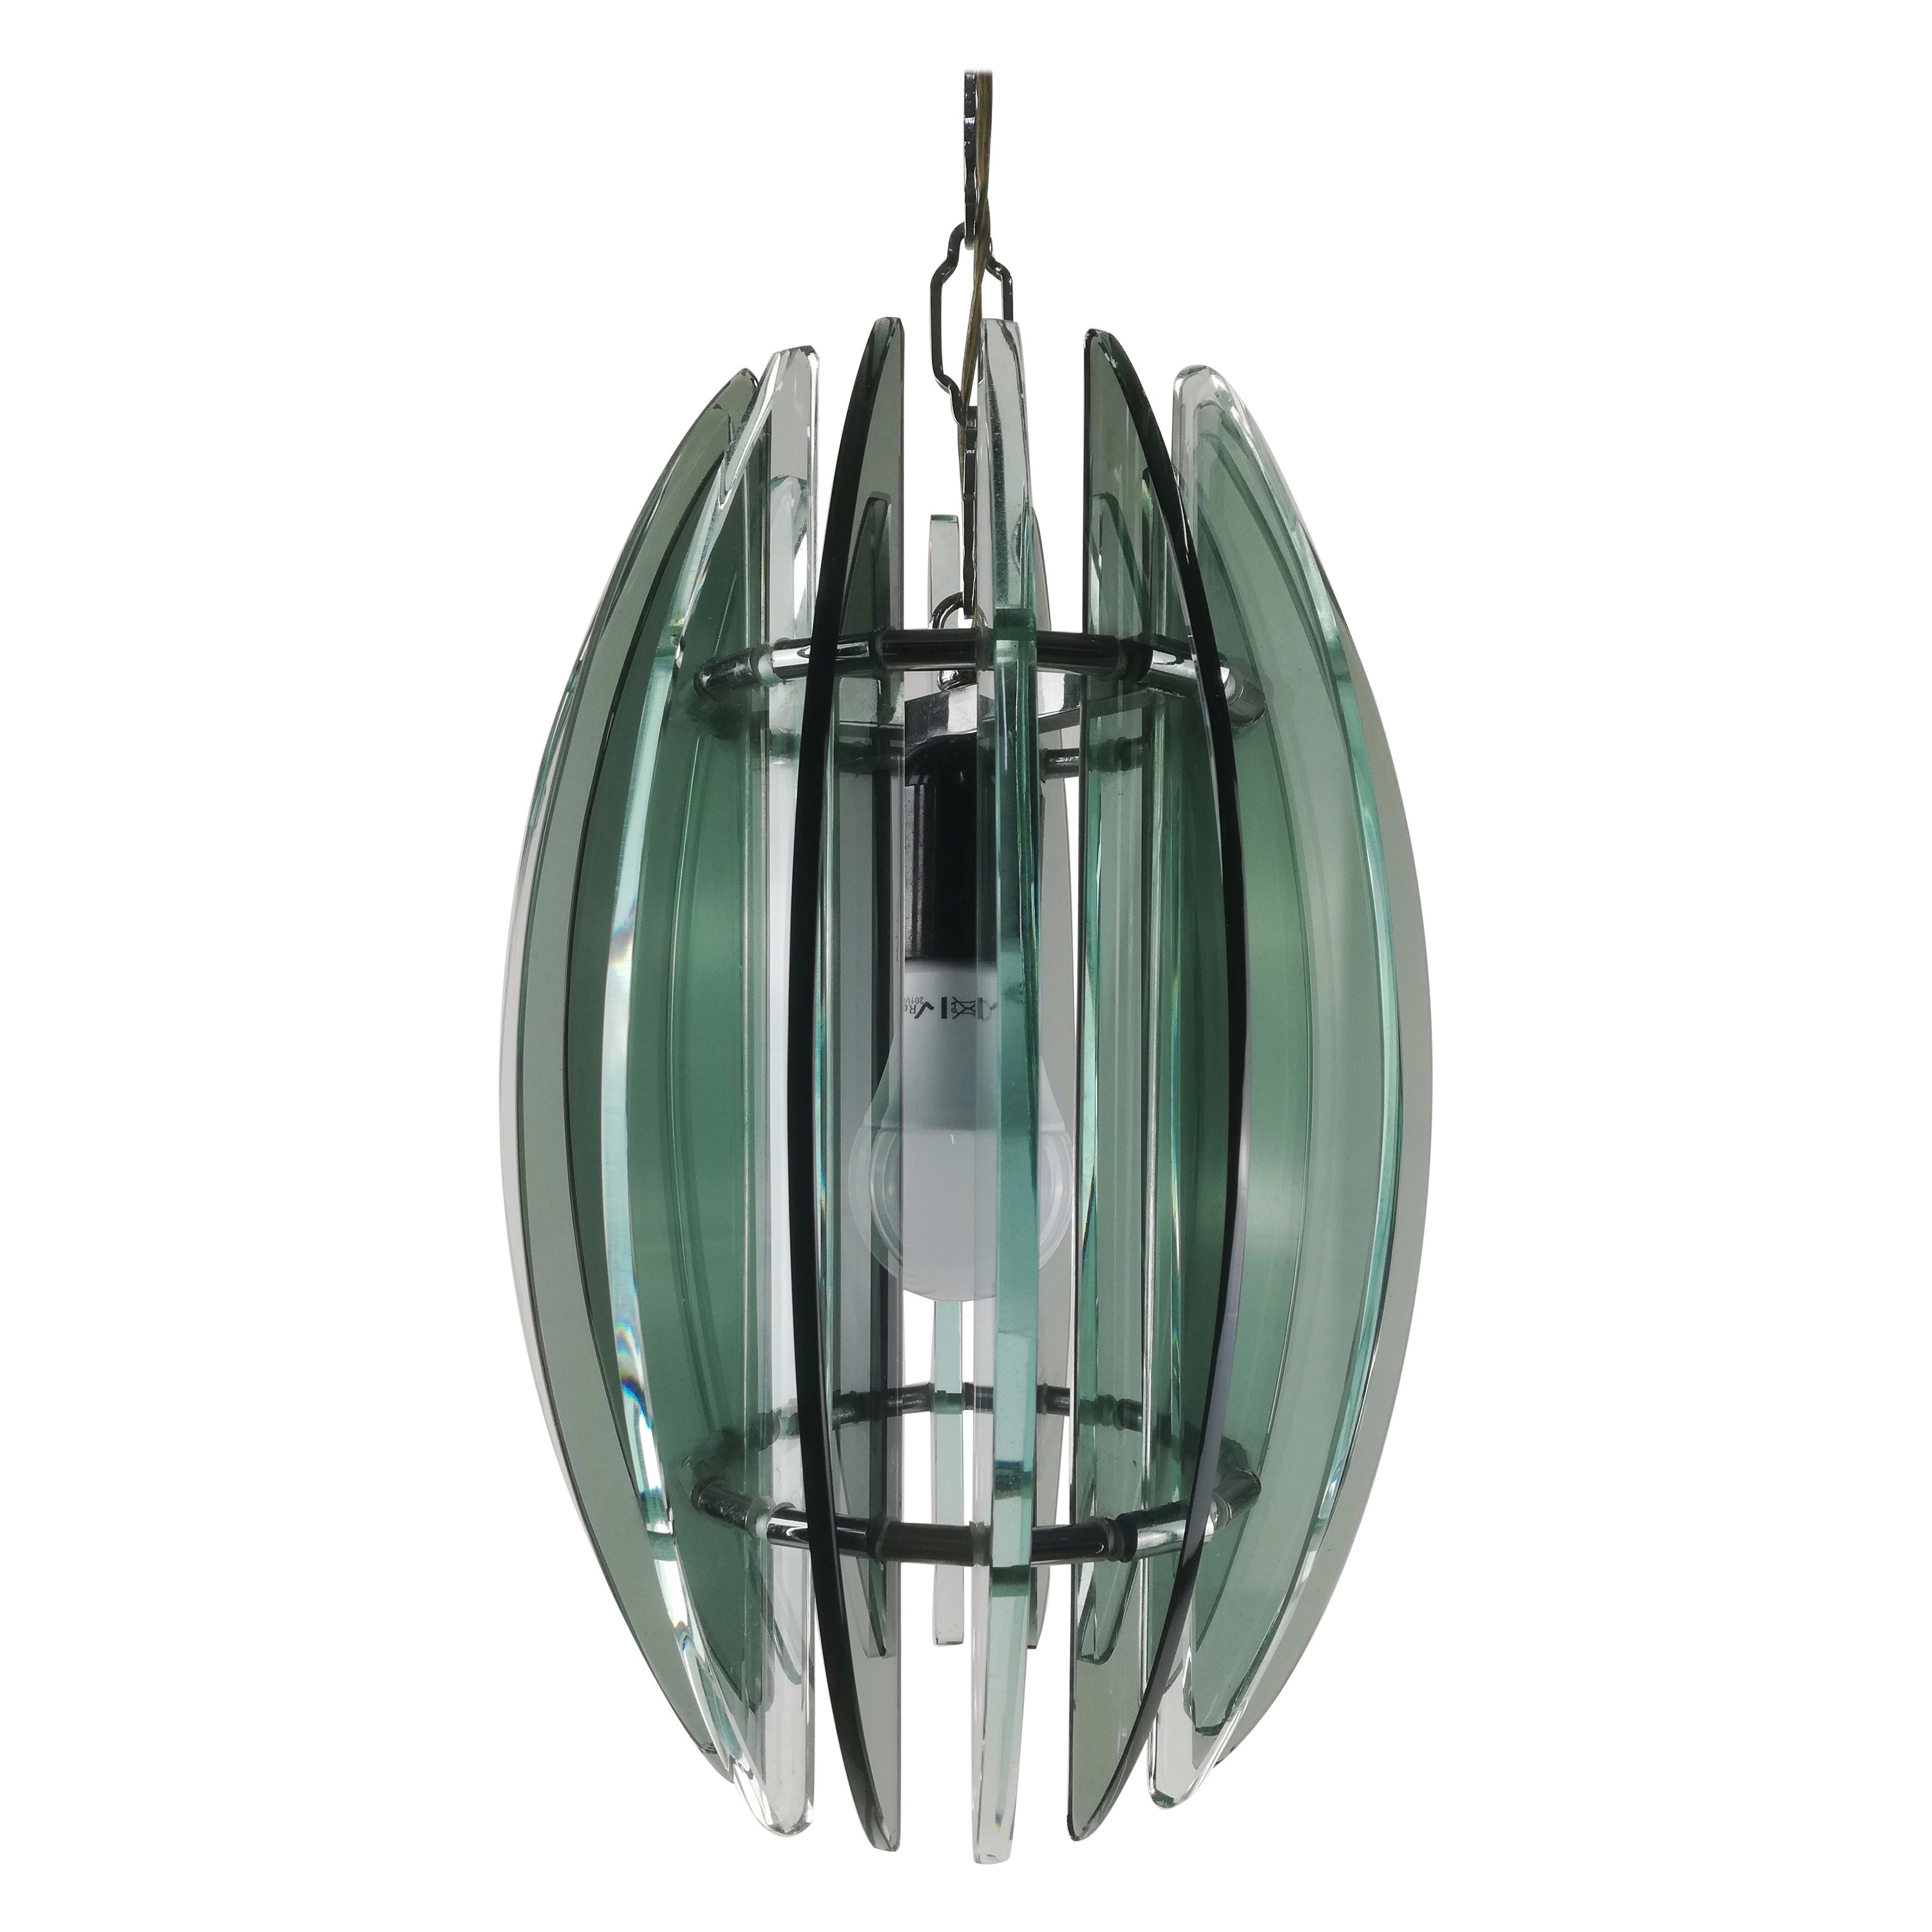 Italian Mid-Century Modern Chandelier by Veca in Fumè and Turquoise Glass